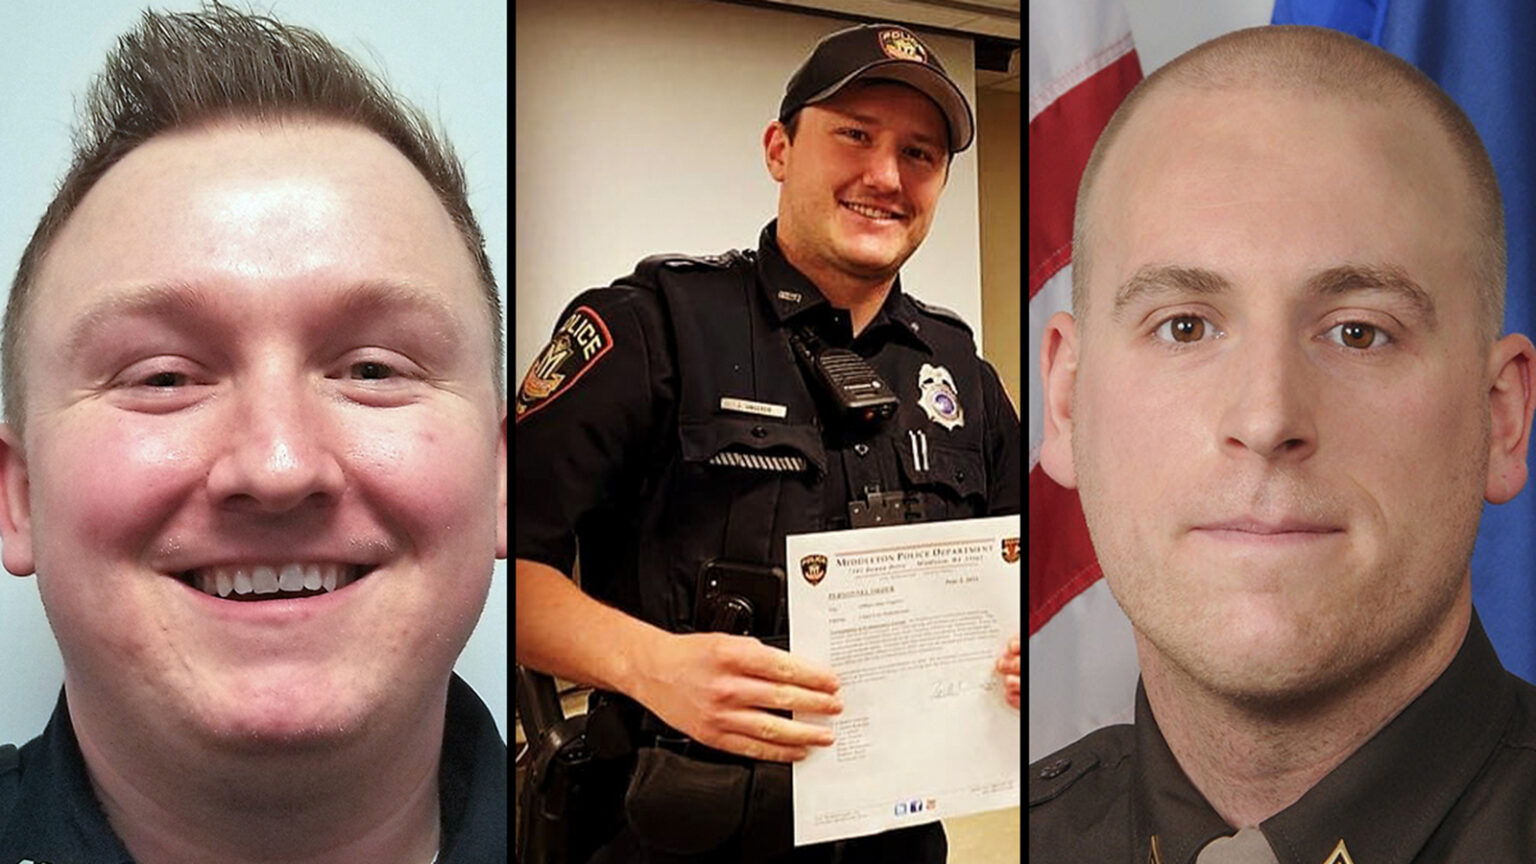 A photo collage showing, left to right, a portrait of Officer Riley Schmidt, Officer Jacob Ungerer holding a letter, and a portrait of Officer Ben Dolnick.